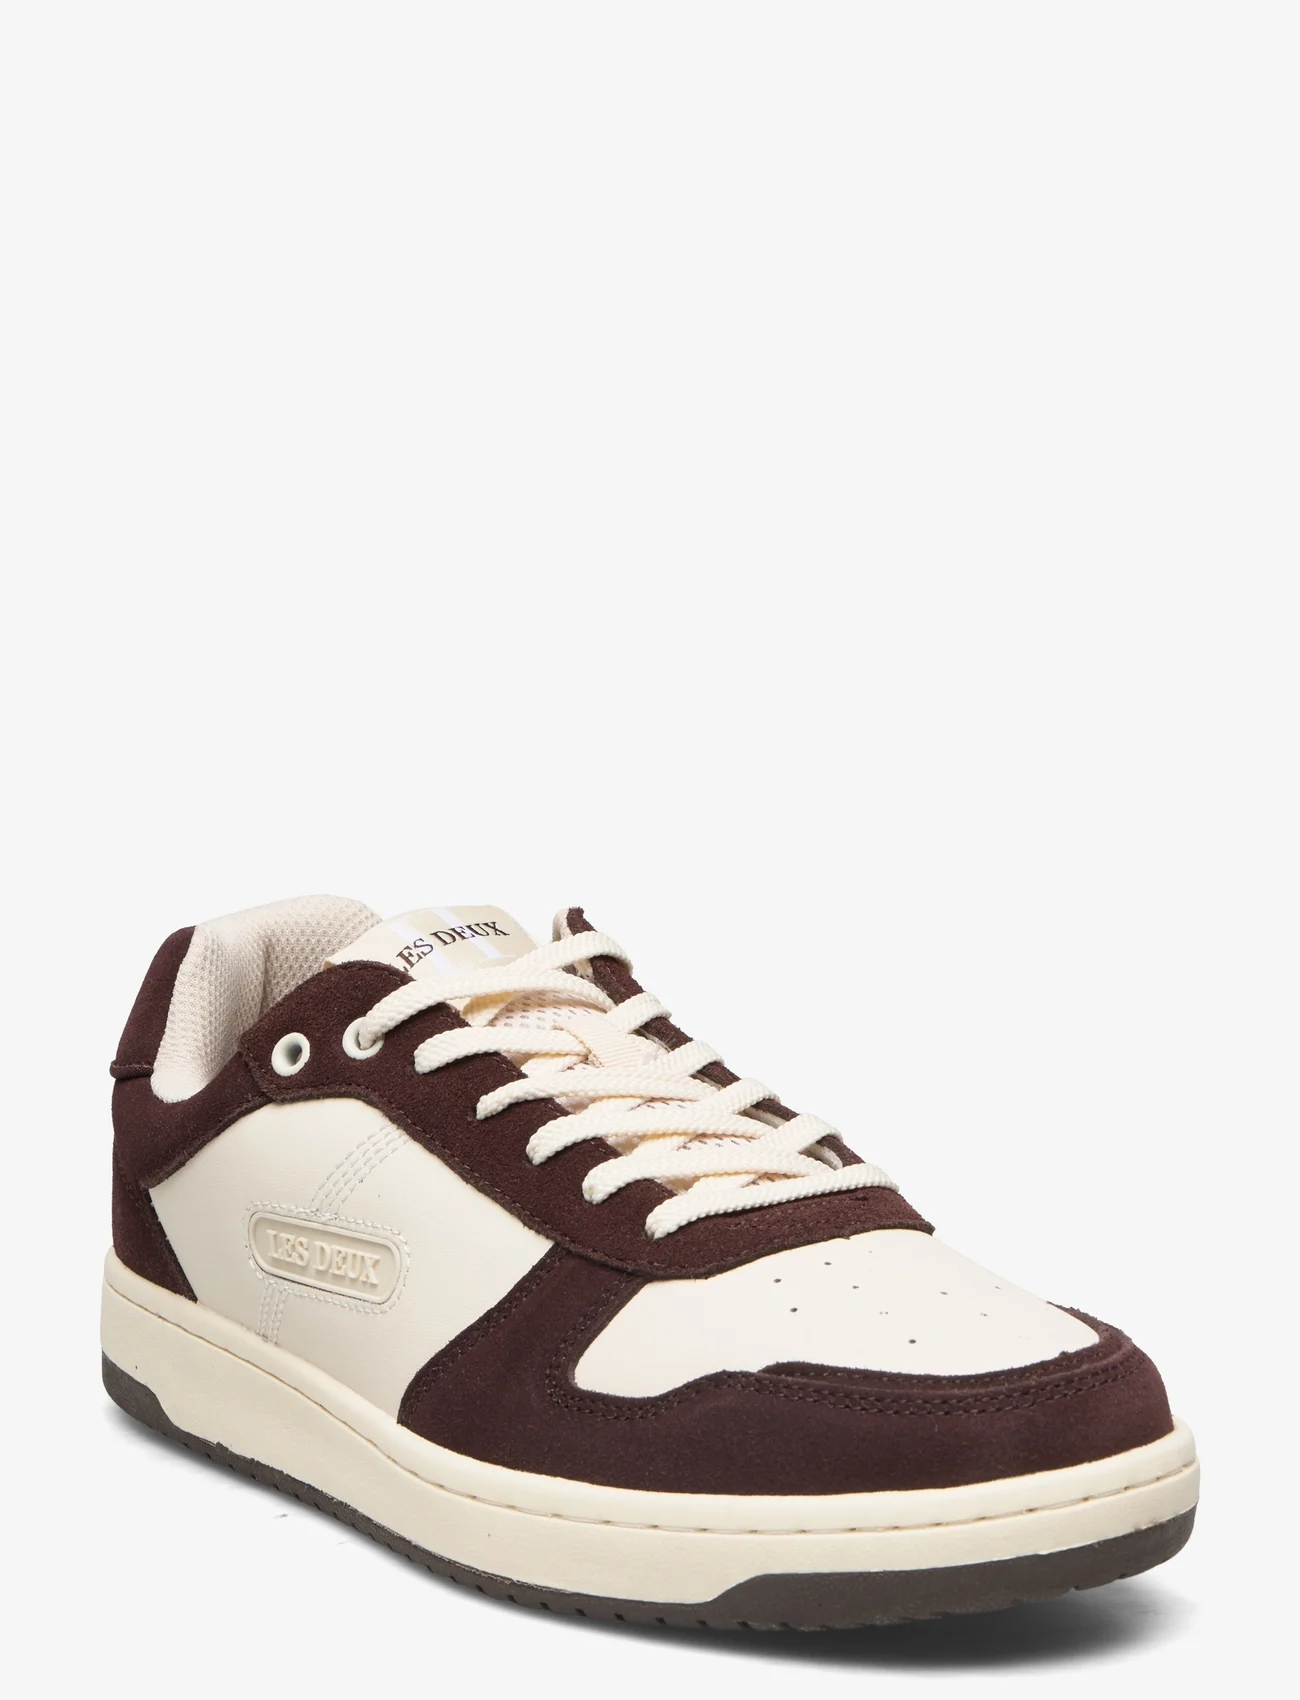 Les Deux - Wright Basketball Sneaker - lave sneakers - white/ebony brown - 0